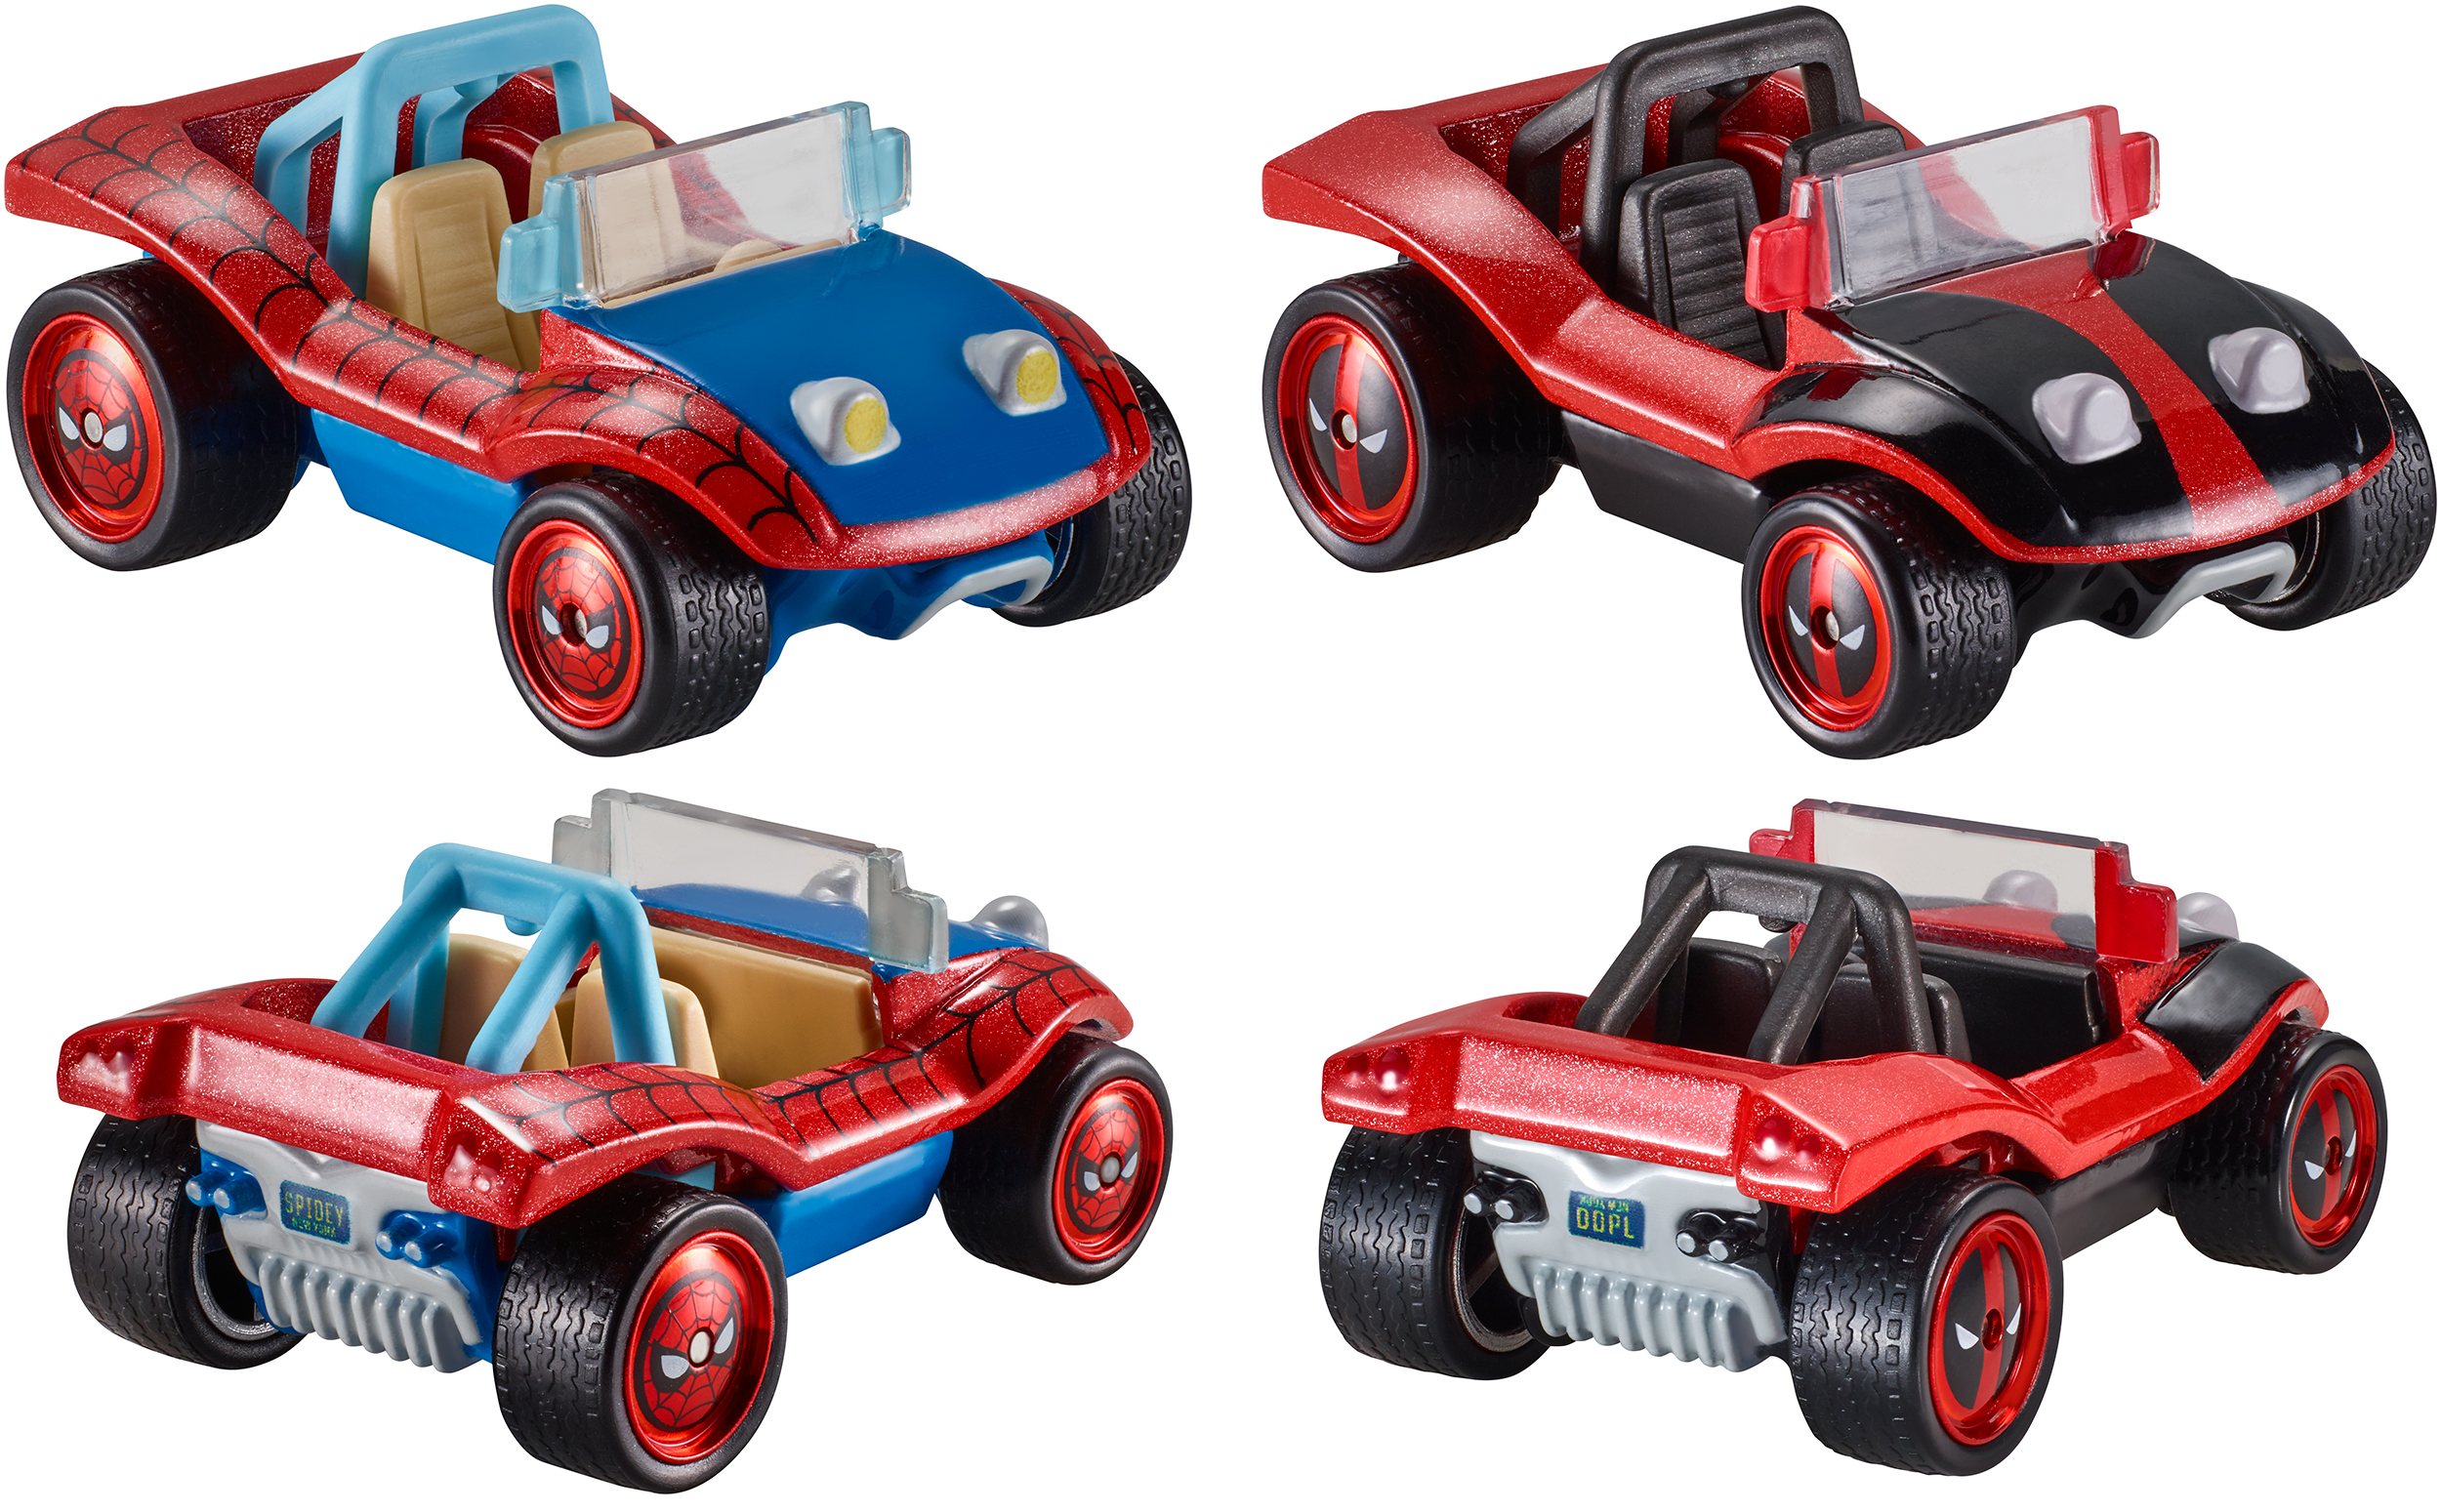 Spider-Man’s Ridiculous Spider-Mobile Returns As Hot Wheels’ Comic-Con Exclusive